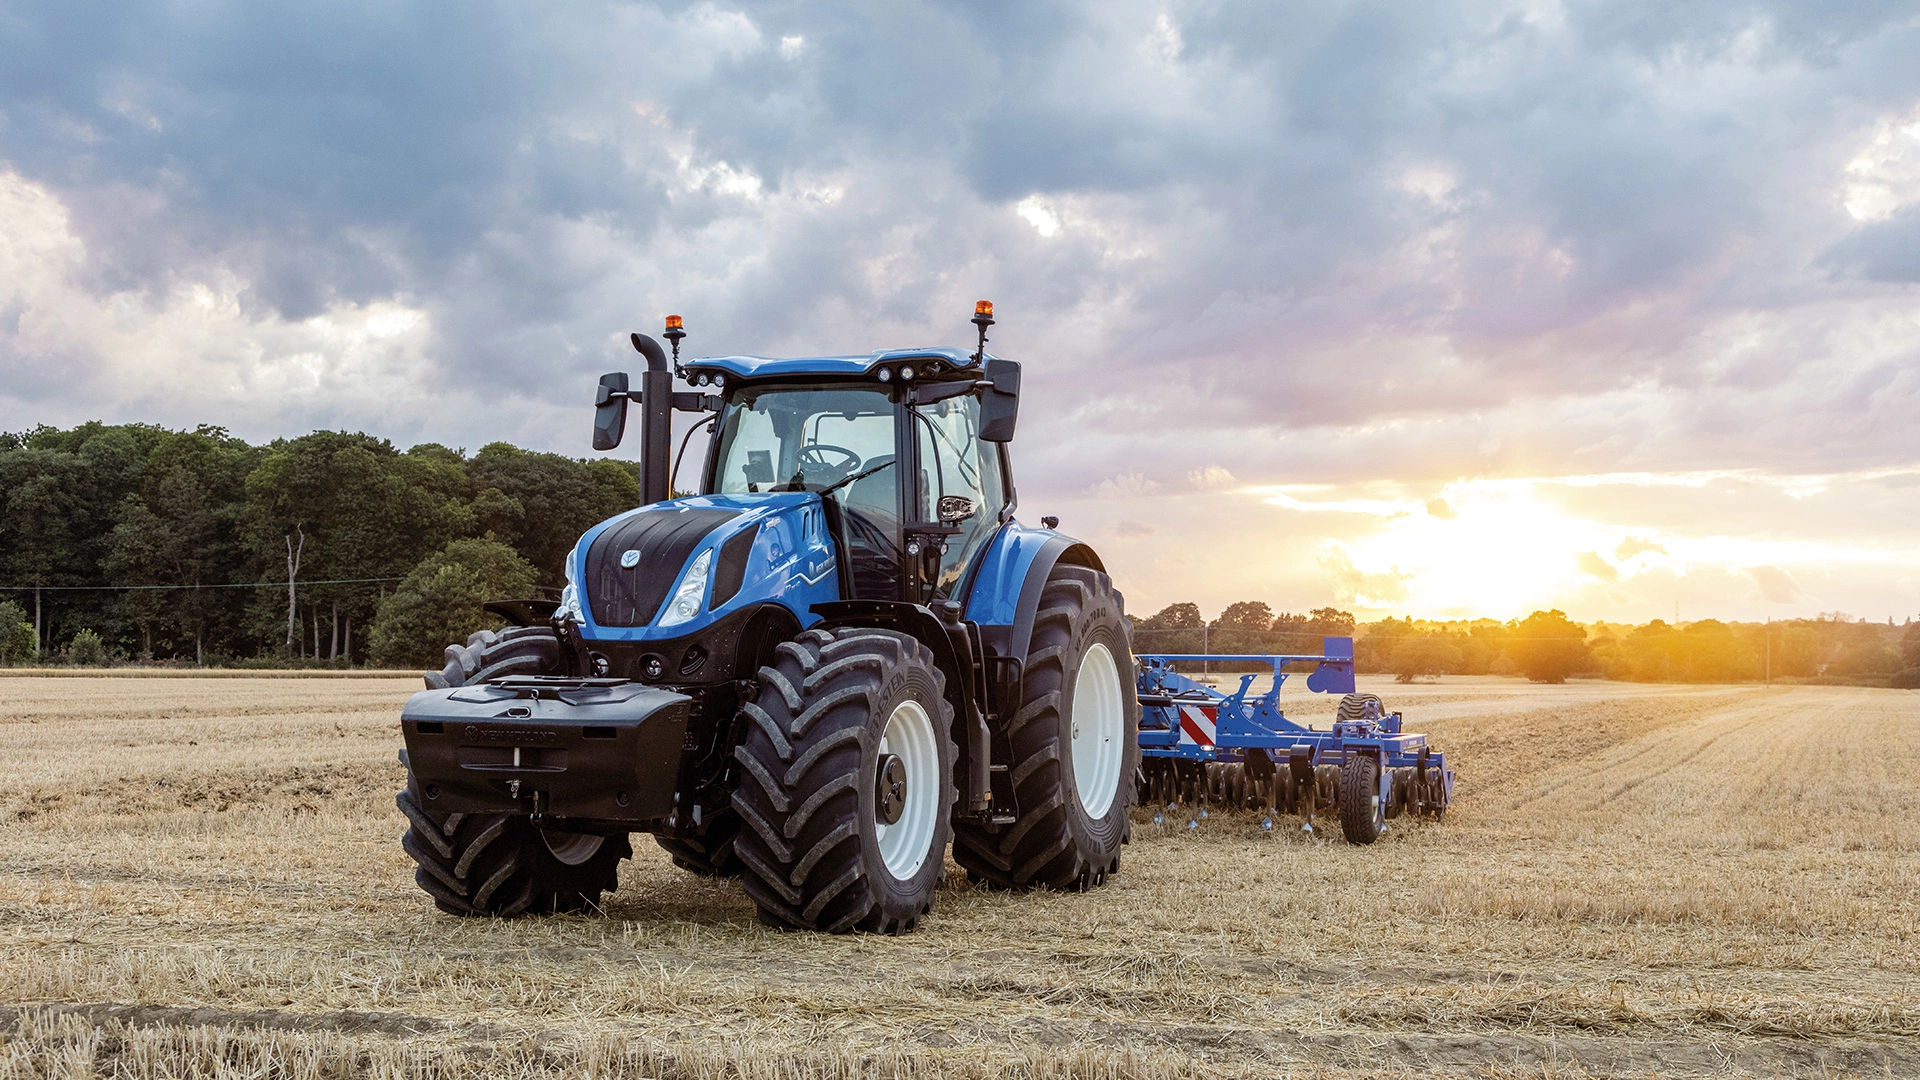 T7 Heavy Duty With PLM Intelligence Tractor demonstrating its performance in an agricultural setting